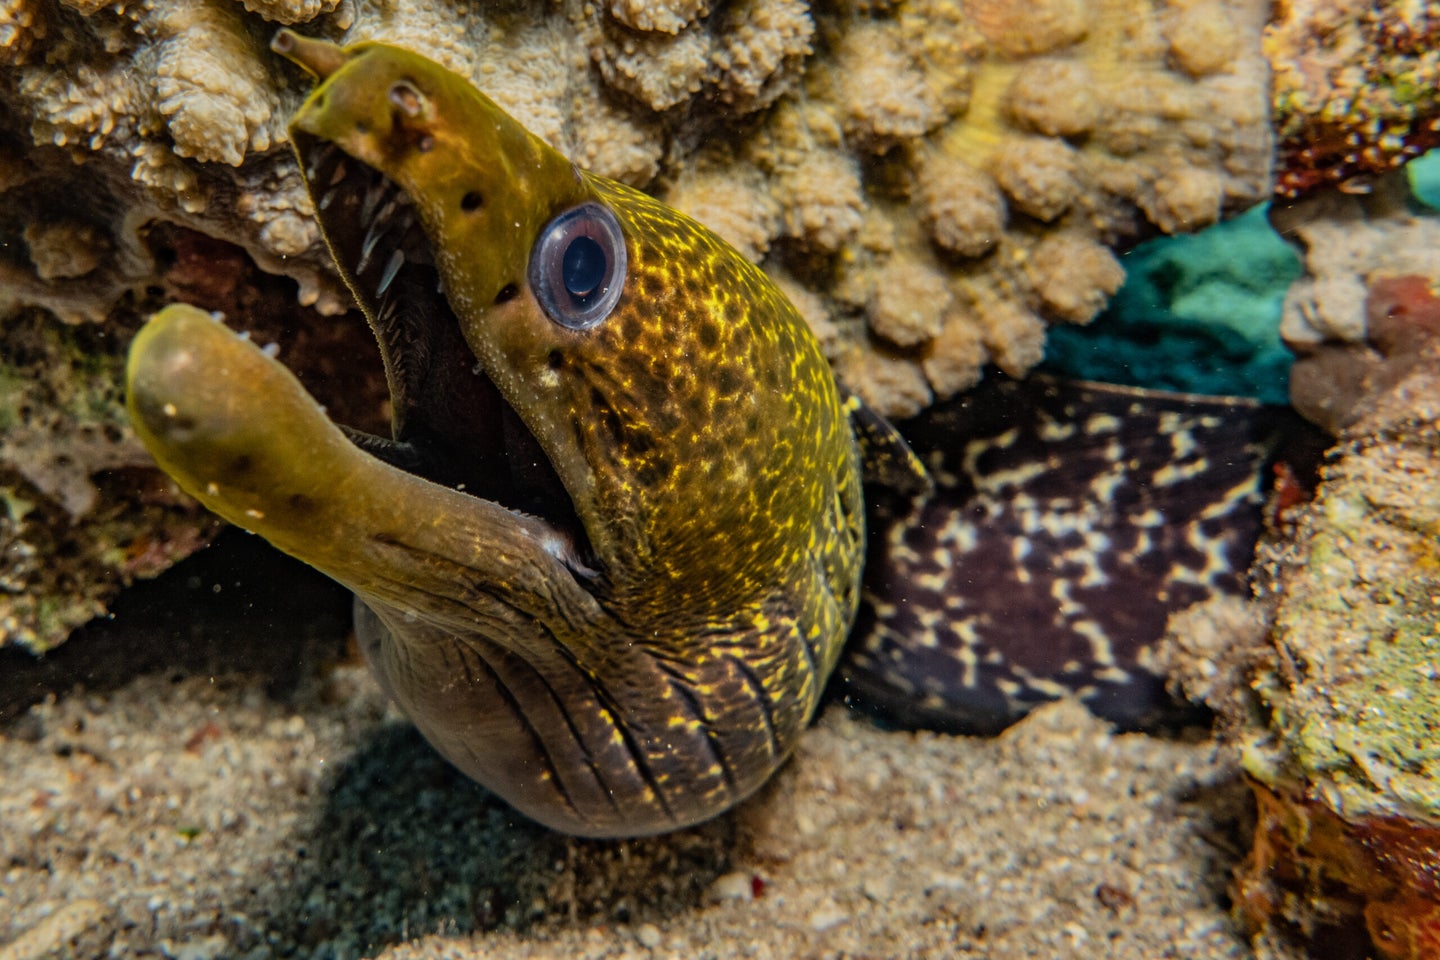 Reproduction habits of eels are still a mystery to researchers.